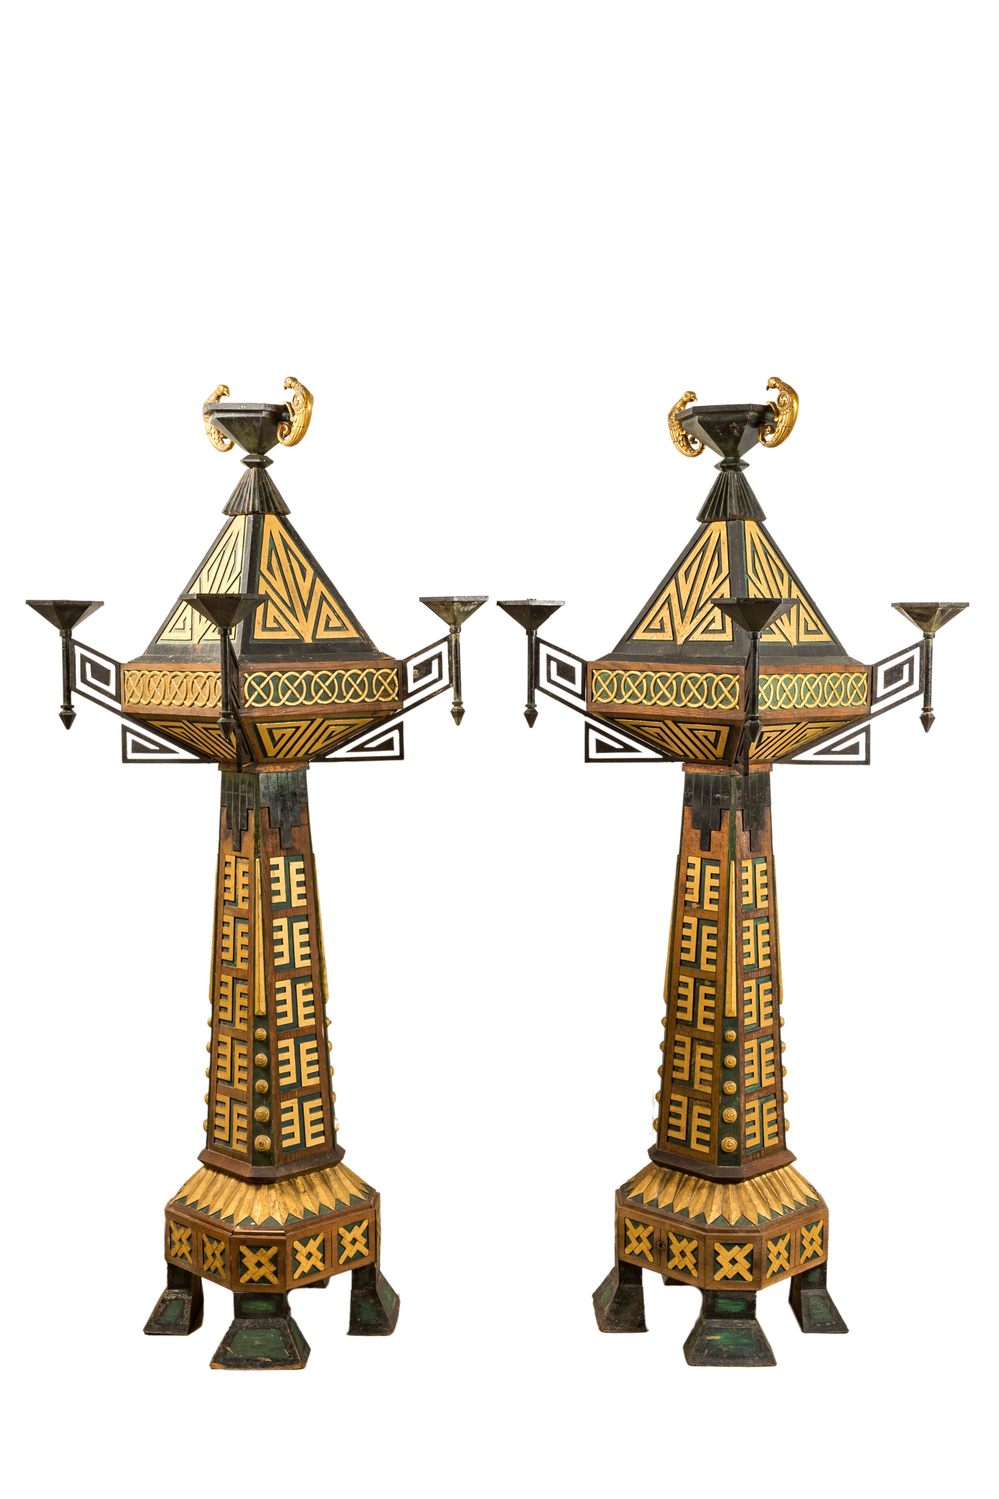 A pair of impressive partly green coloured and gilt wood, dark patinated iron and bronze Art Deco floor lamps, early 20th C.